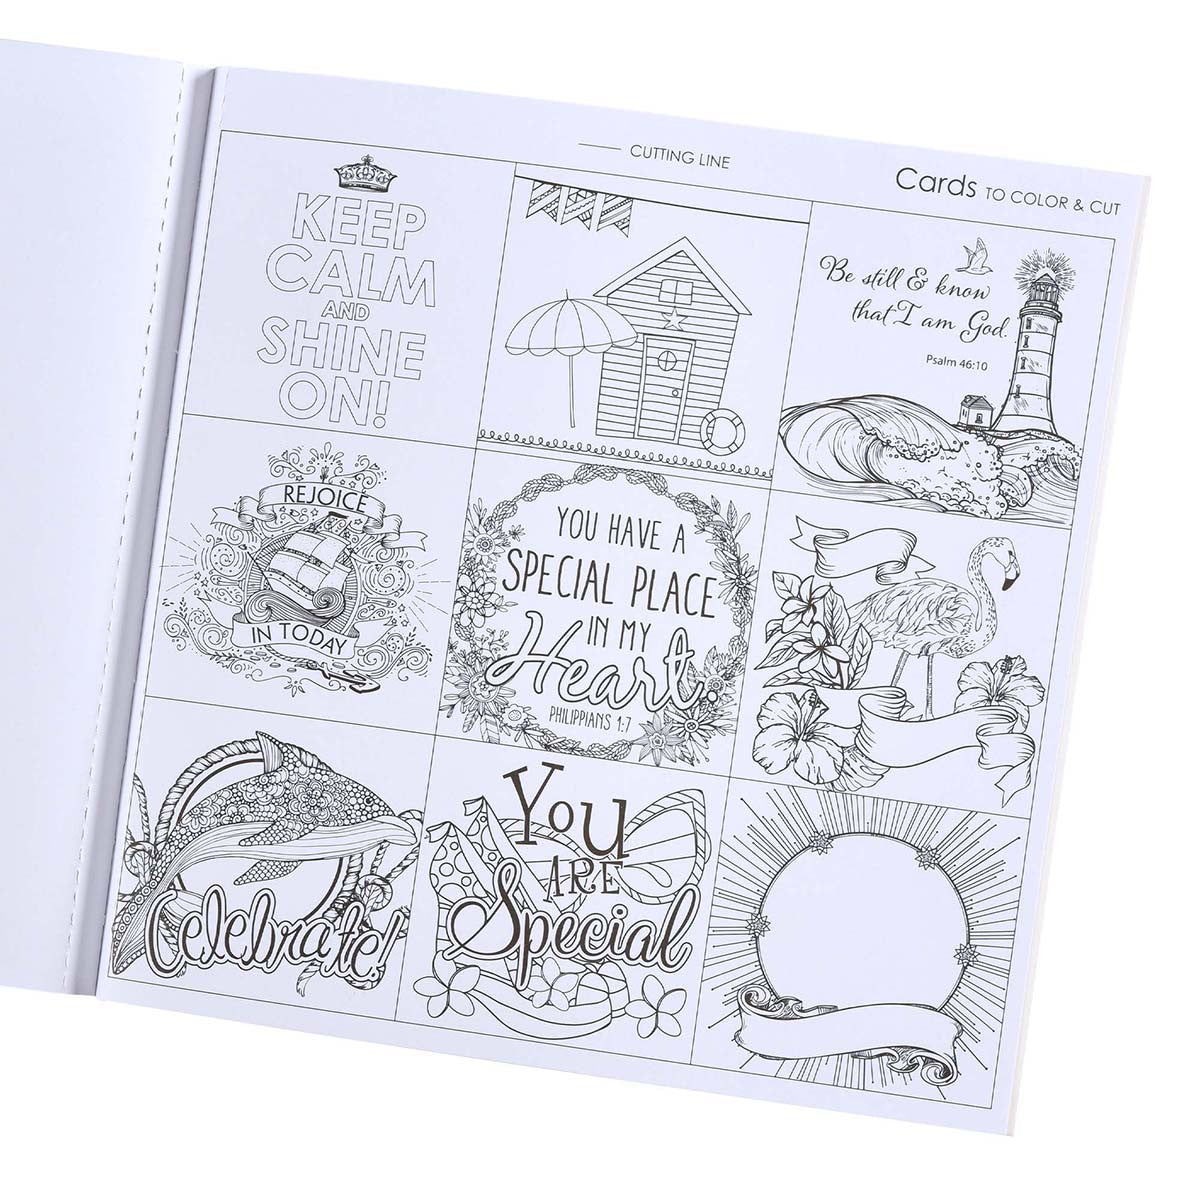 We Have This Hope Inspirational Coloring Book for Adults